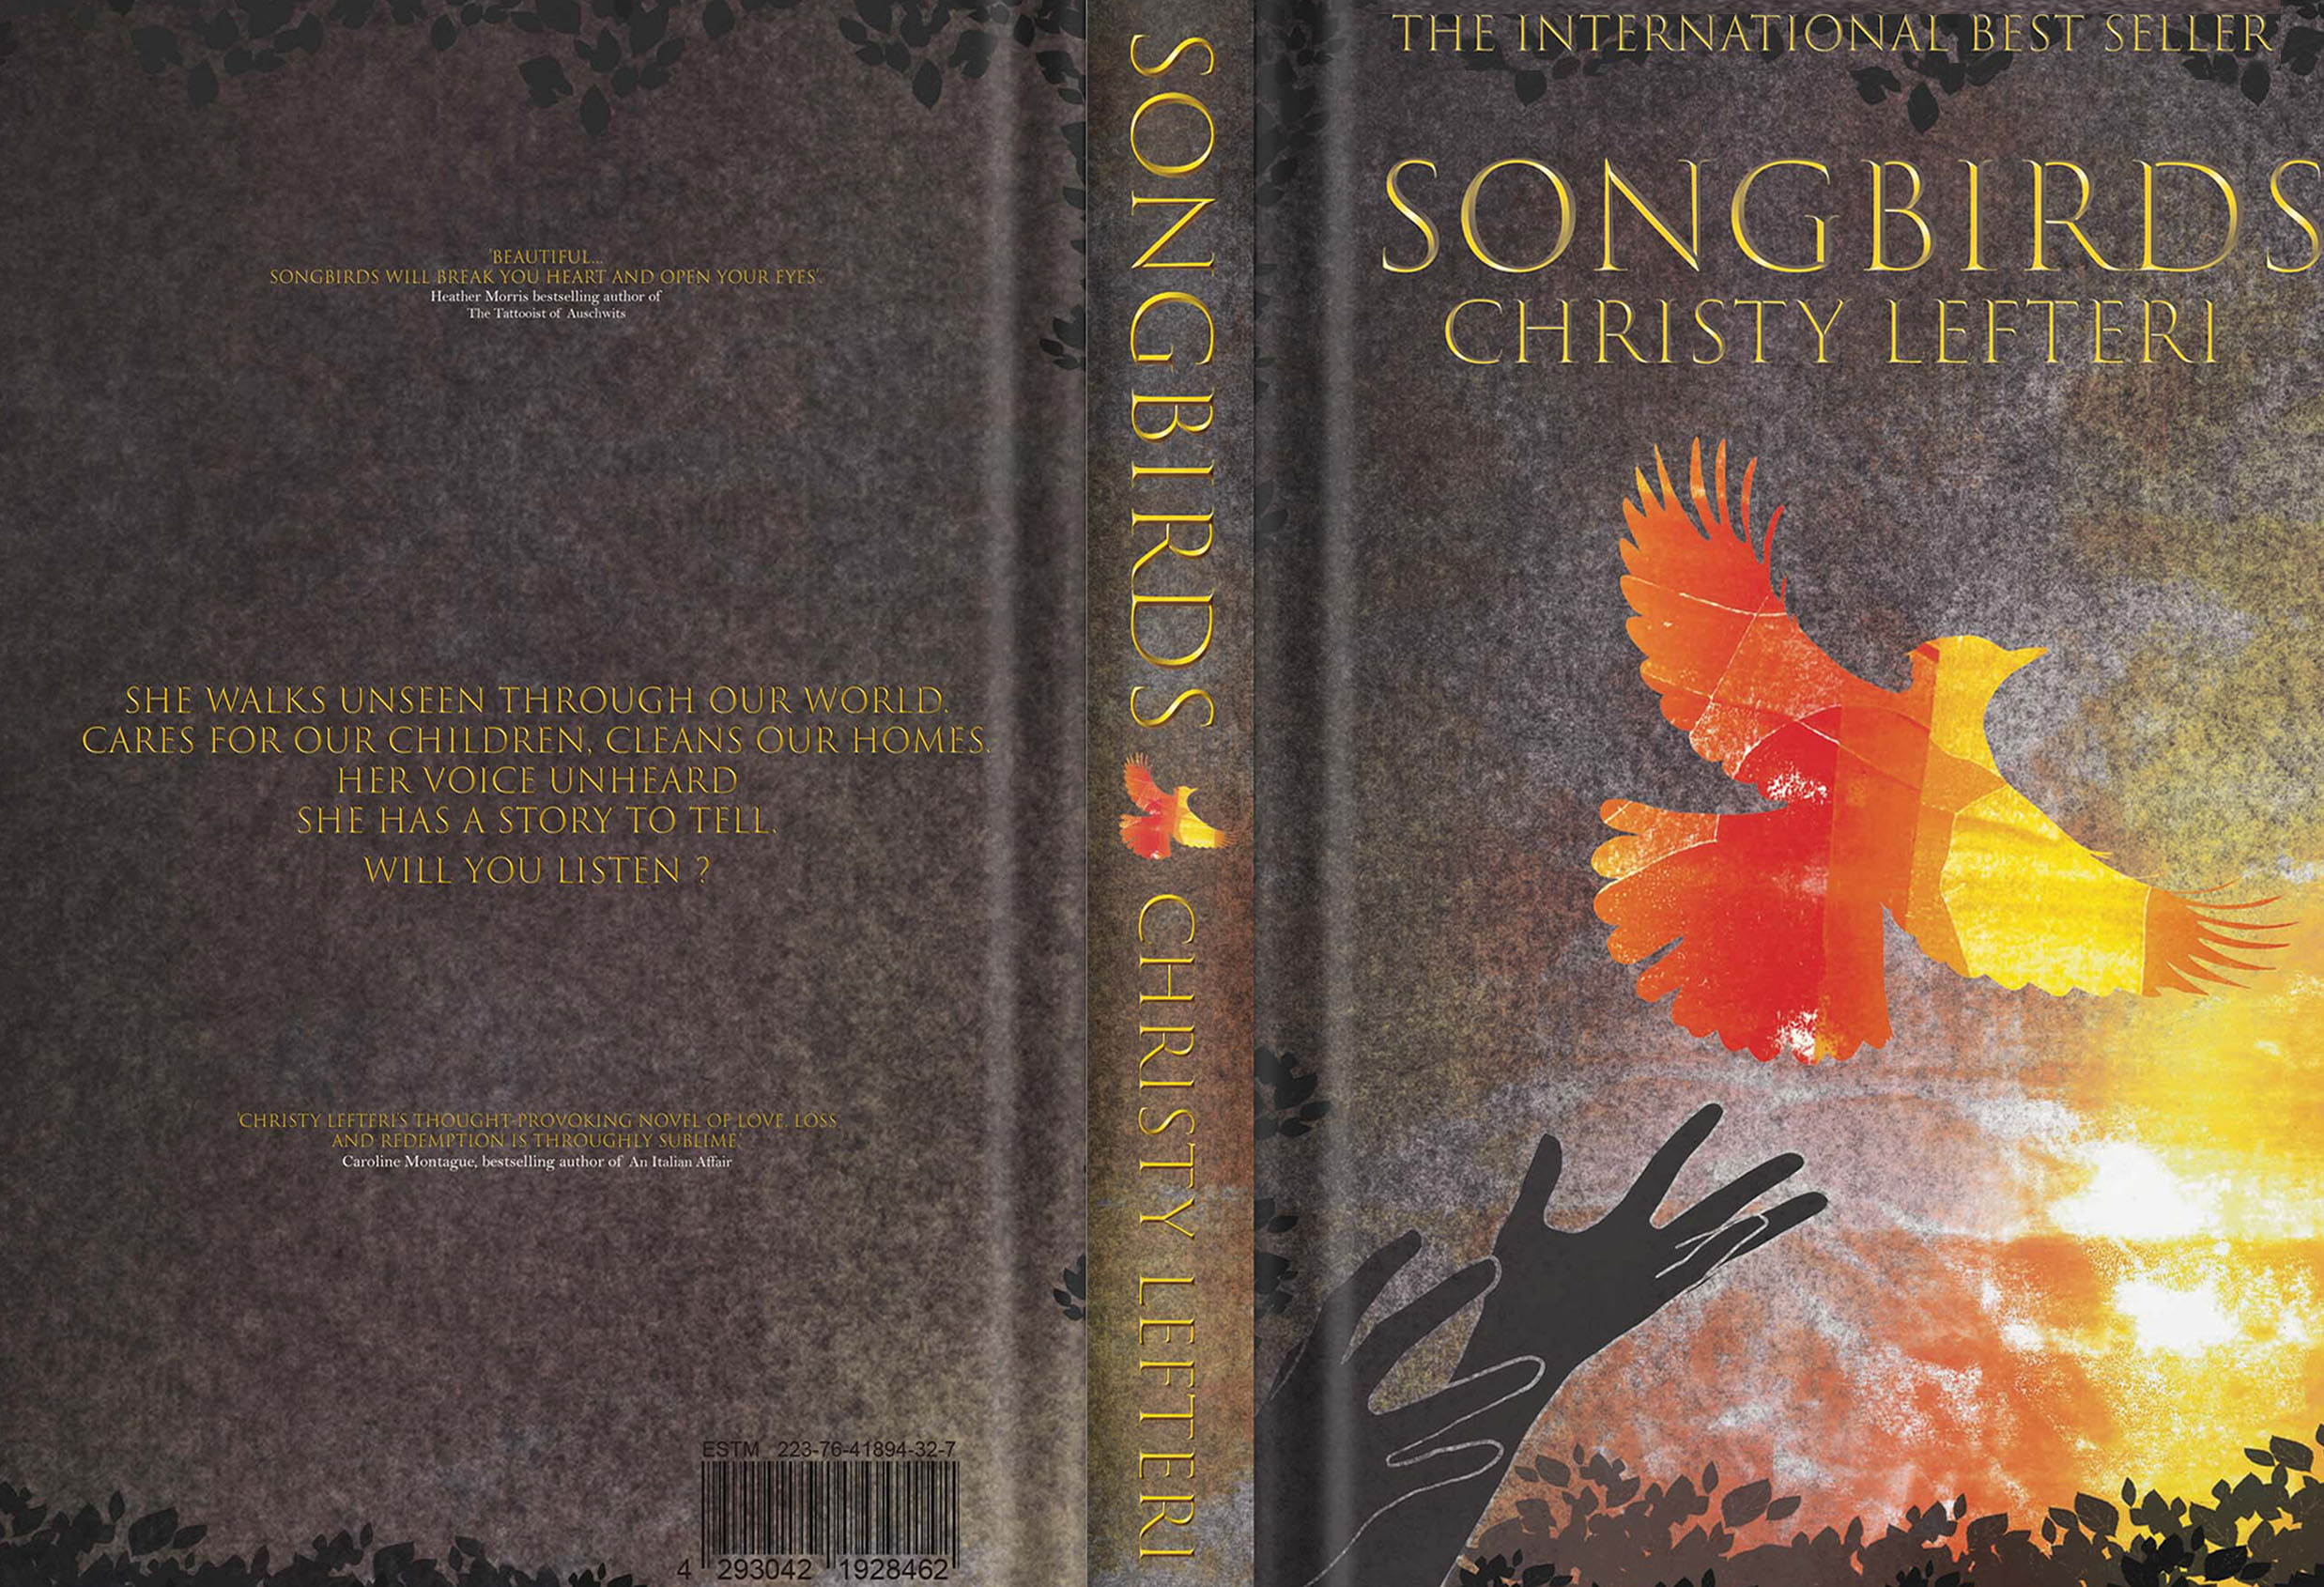 Reimagining the front cover of Songbirds- A novel by Christine Lefteri.